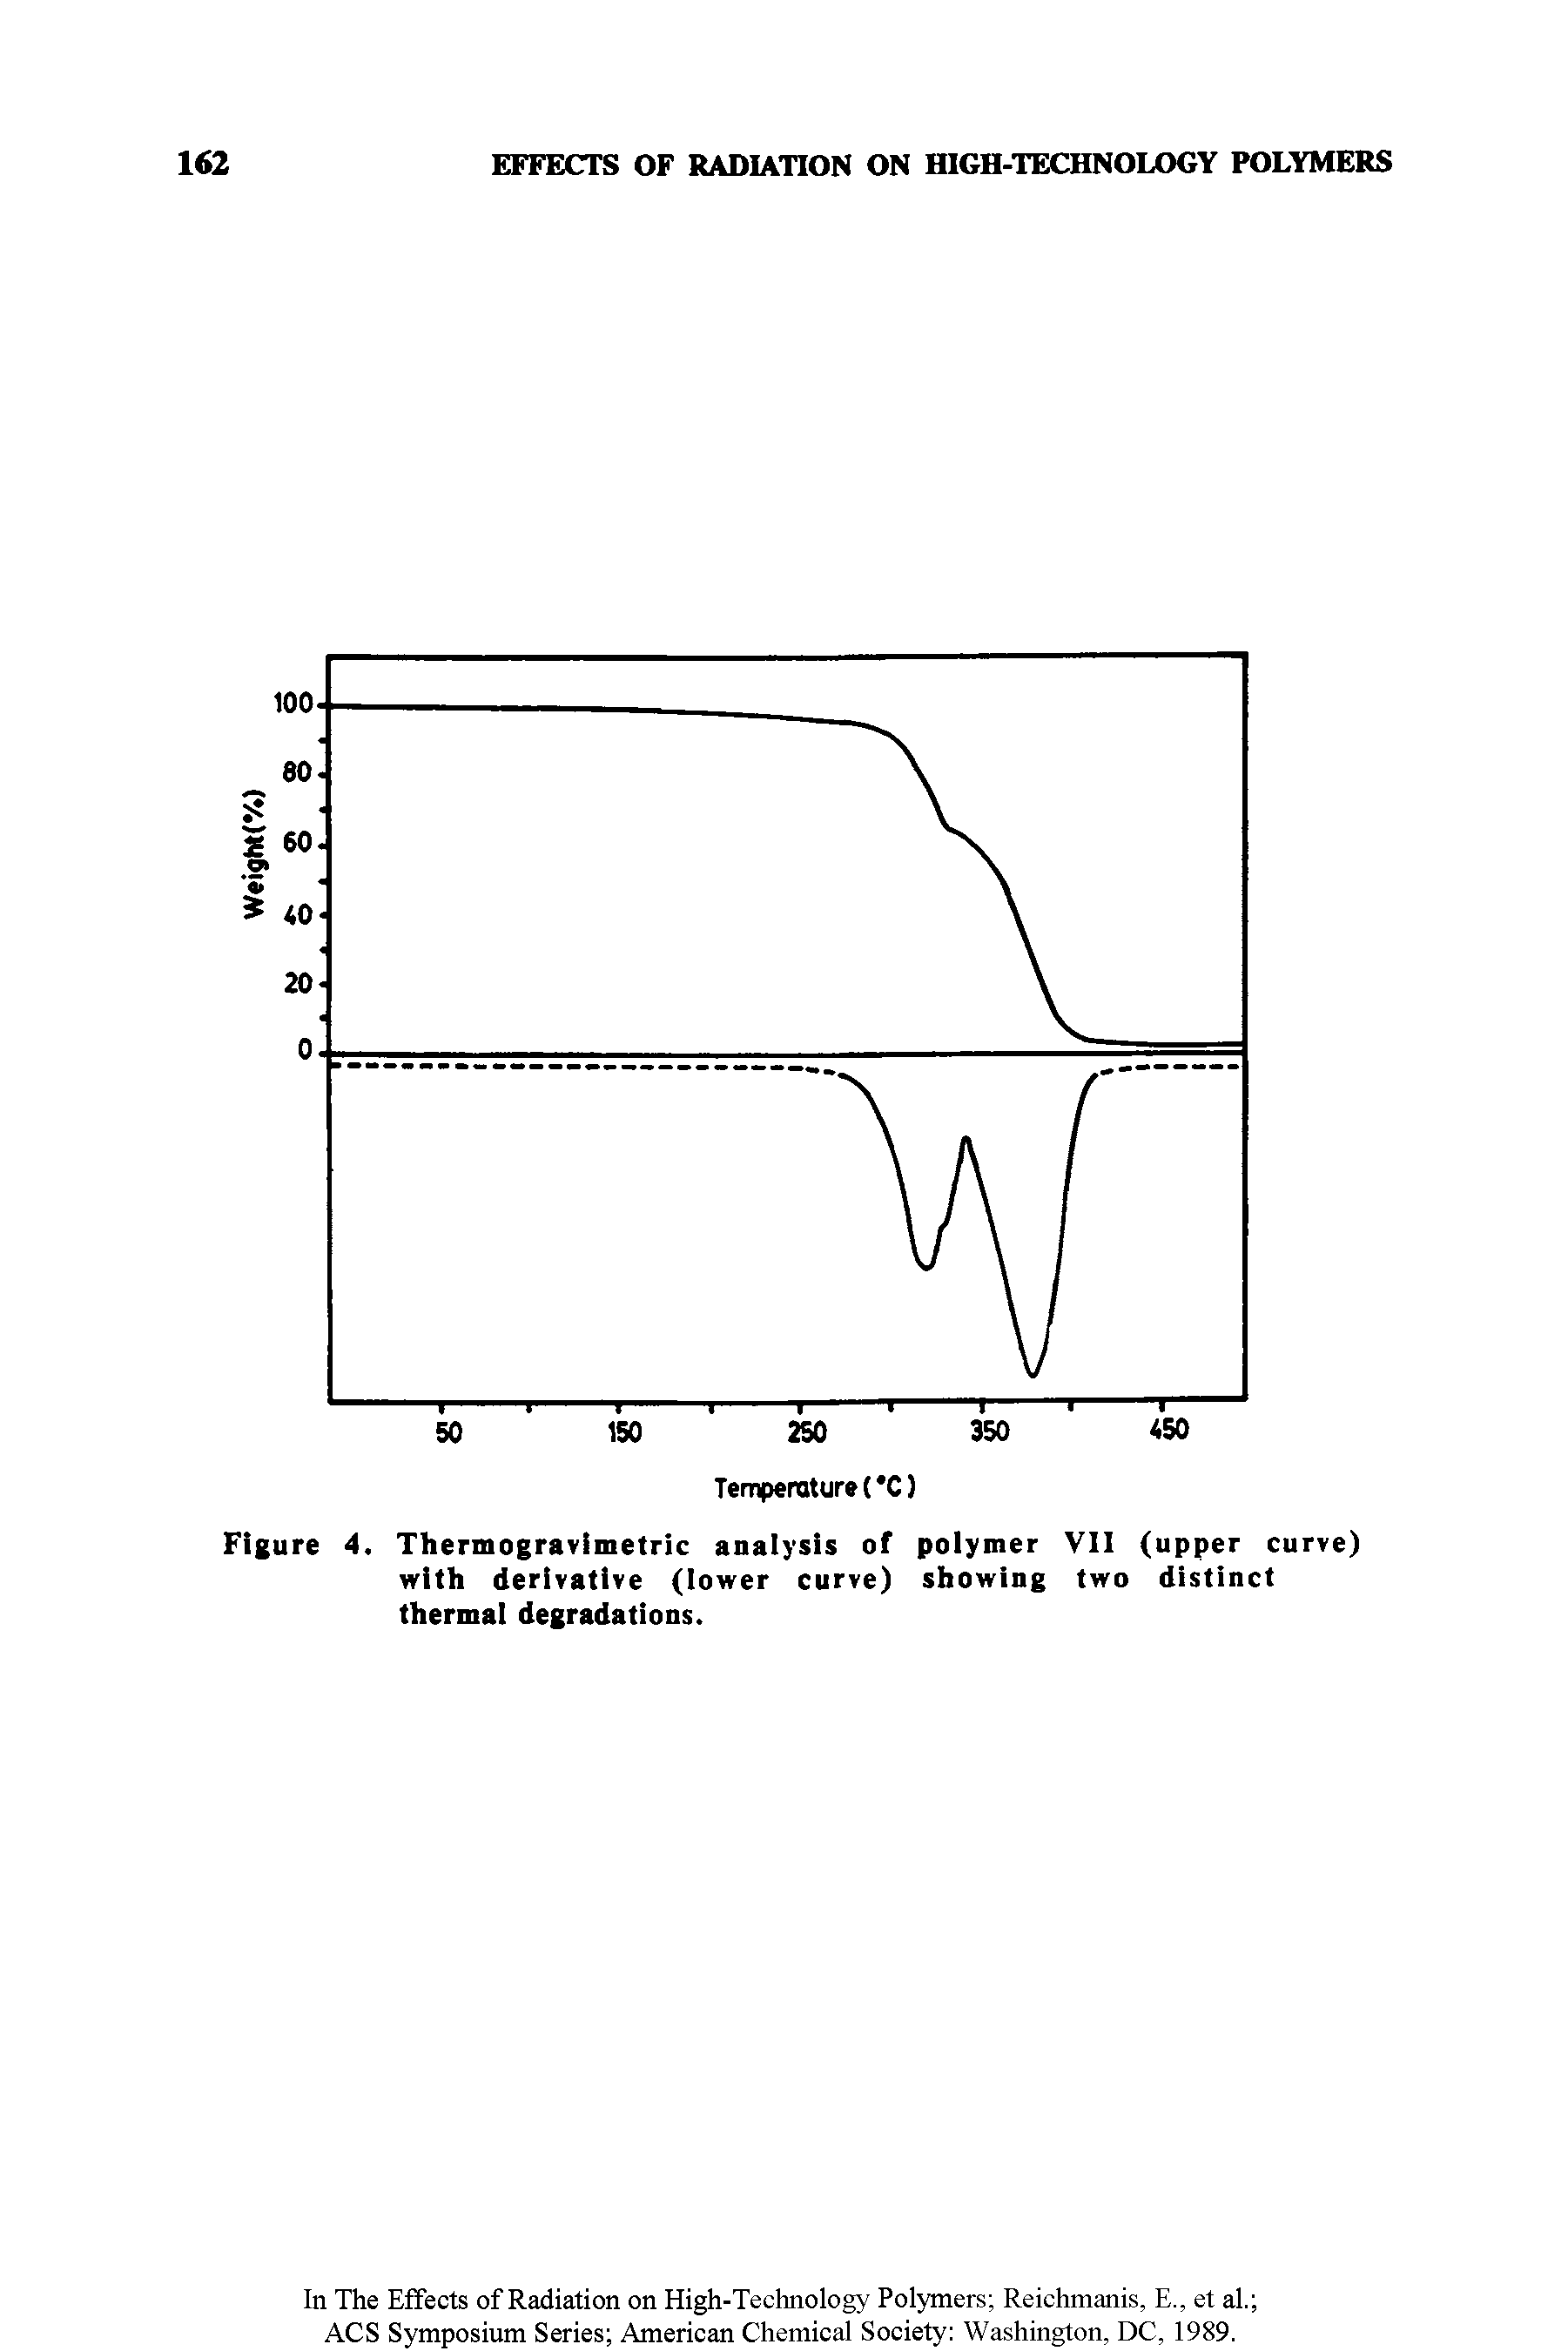 Figure 4. Thermogravimetric analysis of polymer VII (upper curve) with derivative (lower curve) showing two distinct thermal degradations.